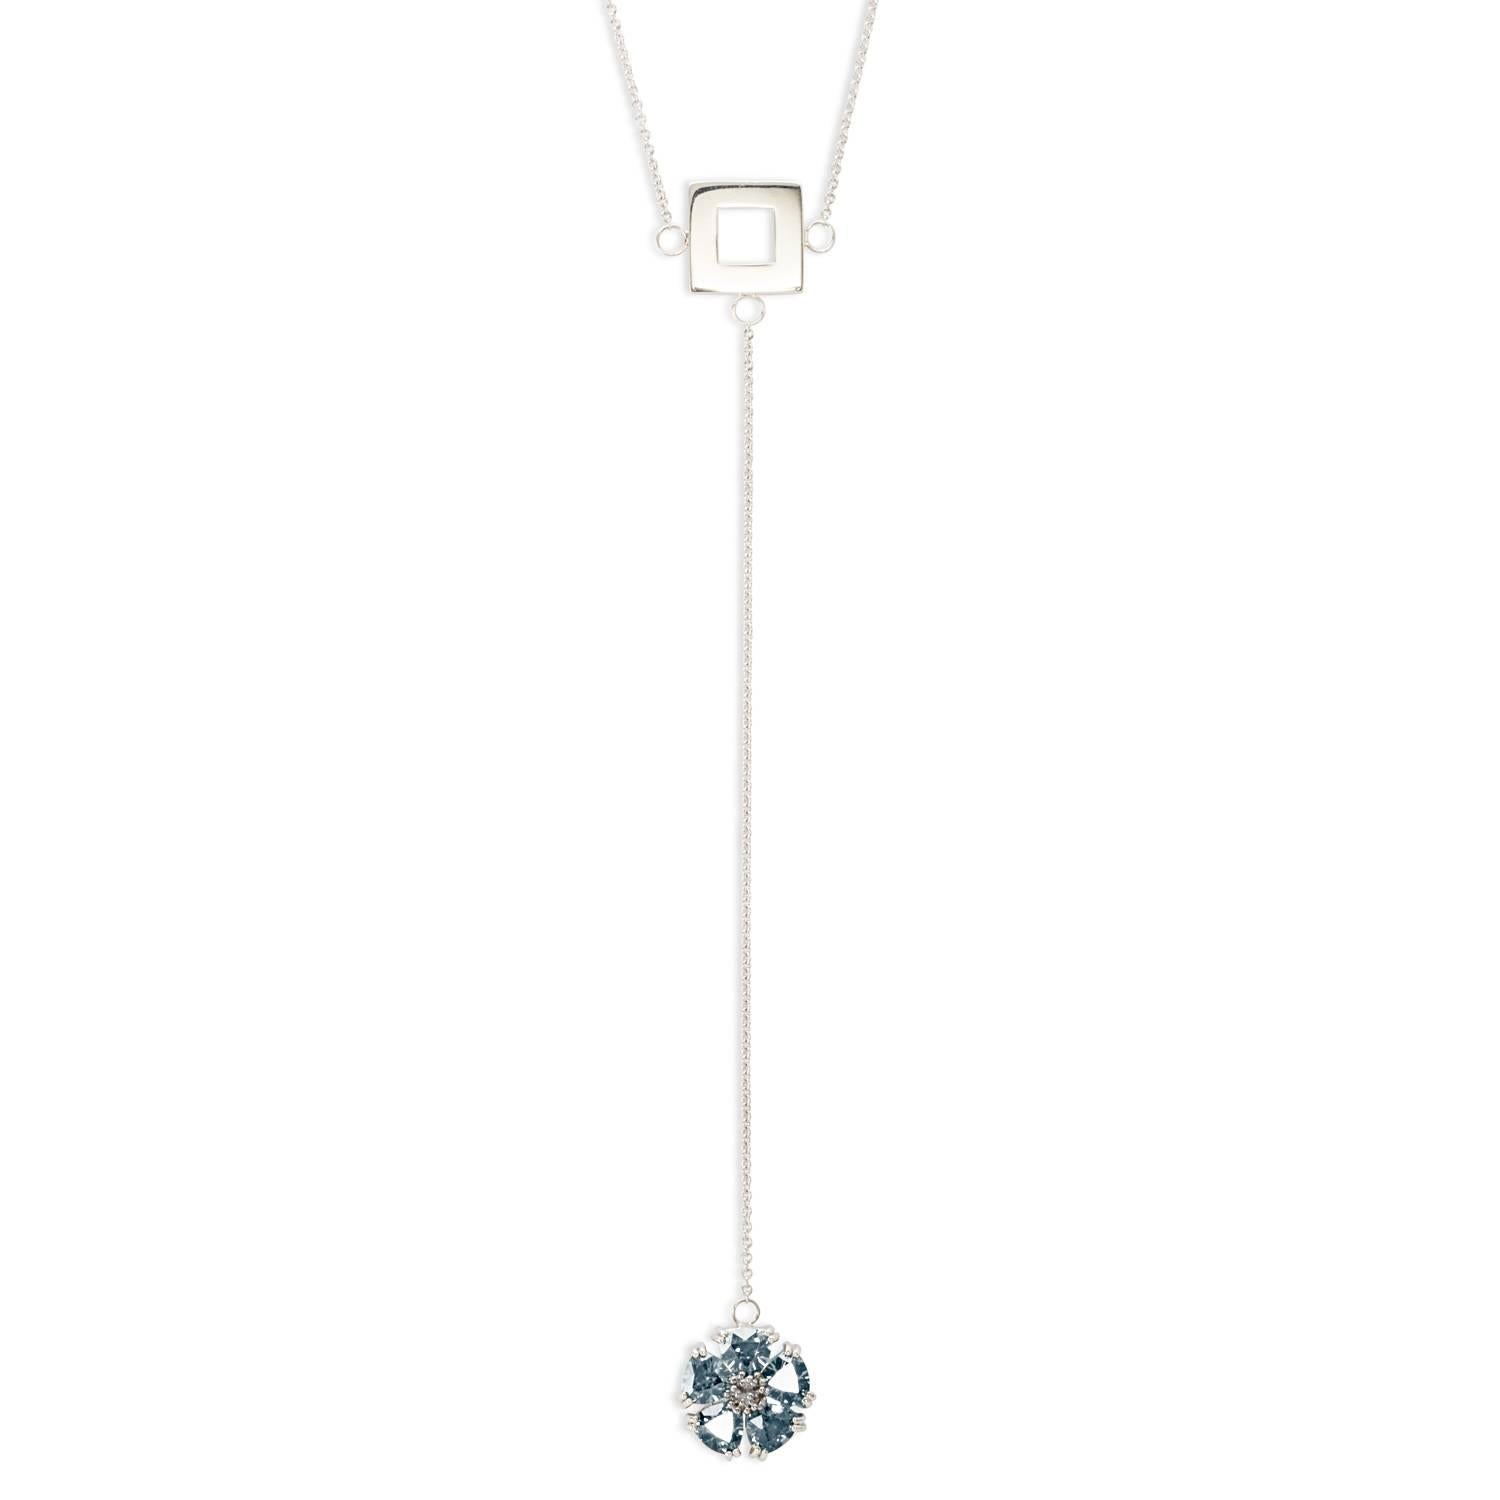 Light Blue Topaz Blossom Stone and Square Lariat Necklace For Sale